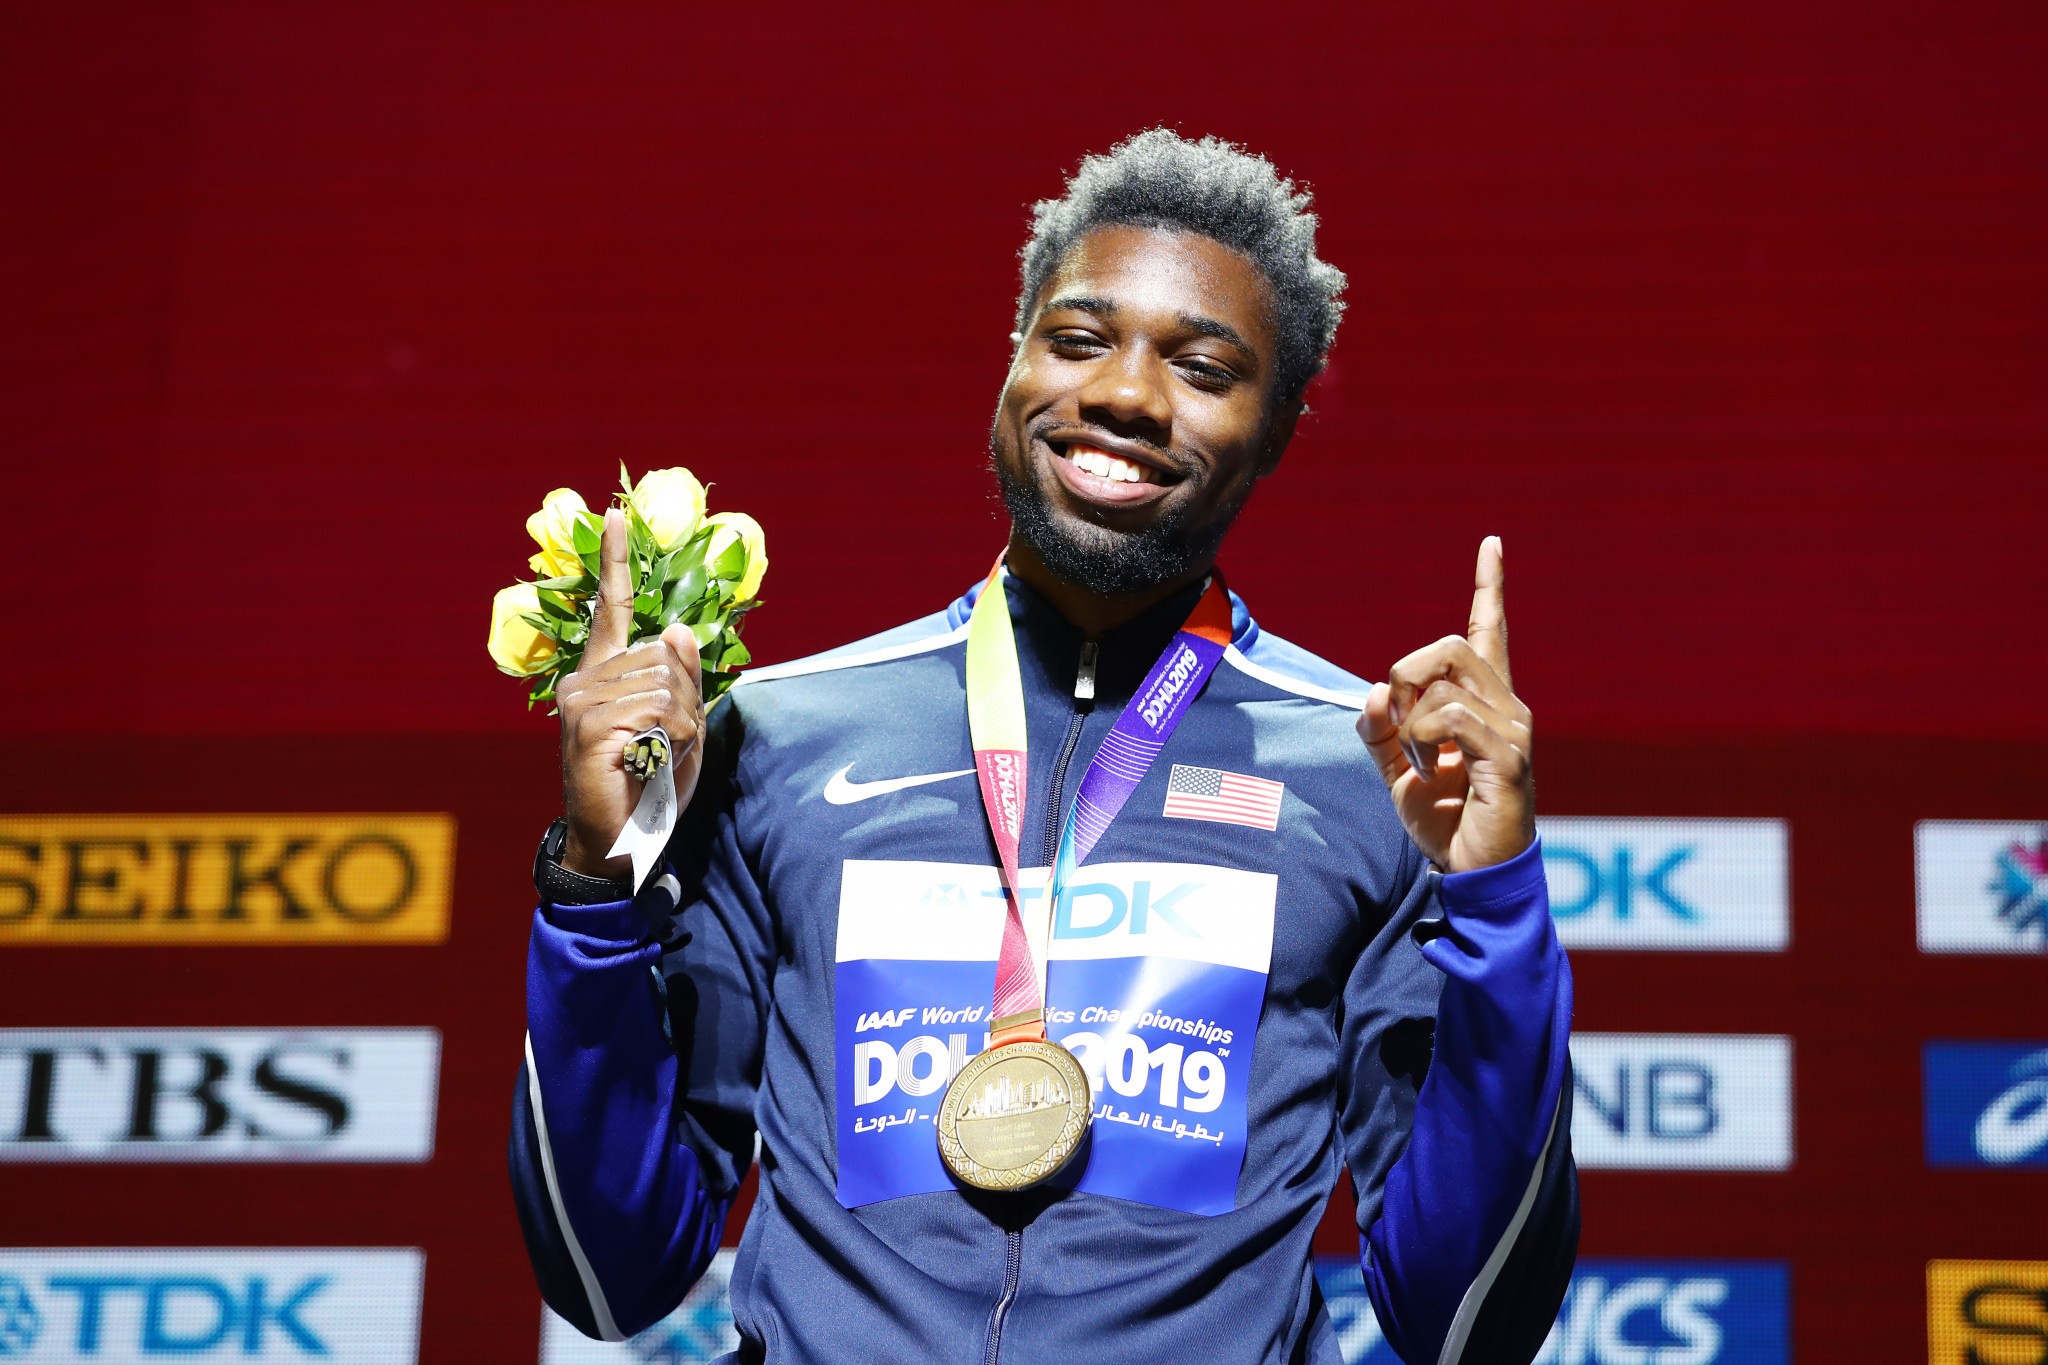 Noah Lyles earned gold in the 200m and 4x100m events at the 2019 World Athletics Championships in Doha ©Getty Images